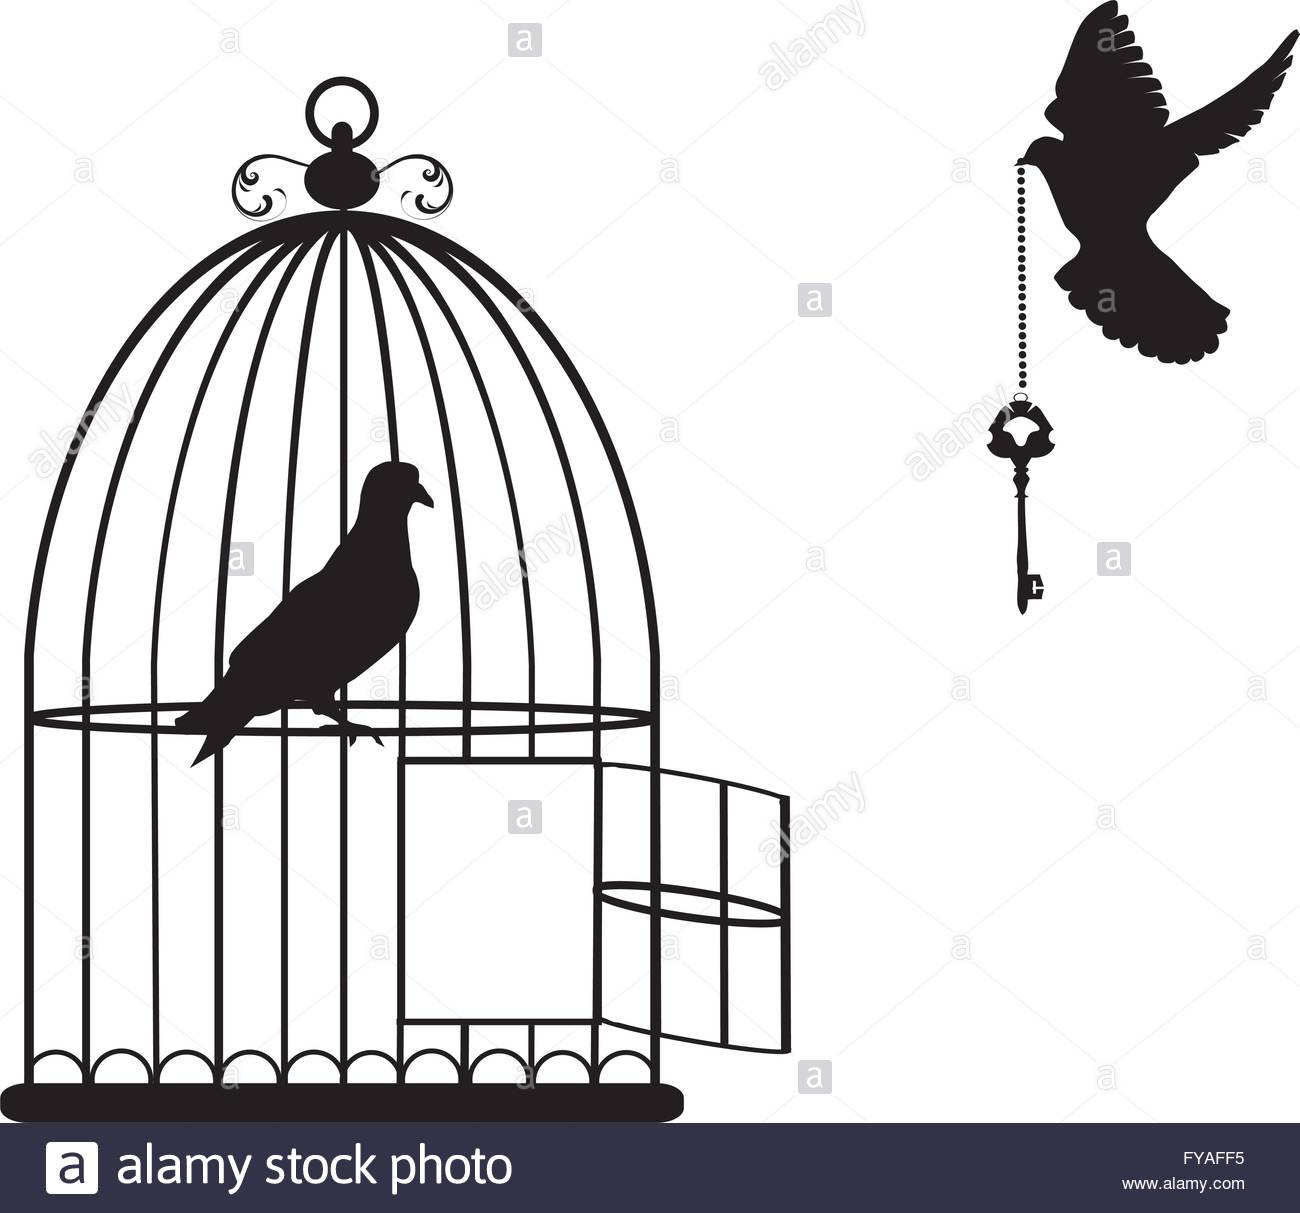 Vector Illustration Of A Bird Cage Open With Doves Flying avec Dessin De Cage D Oiseau